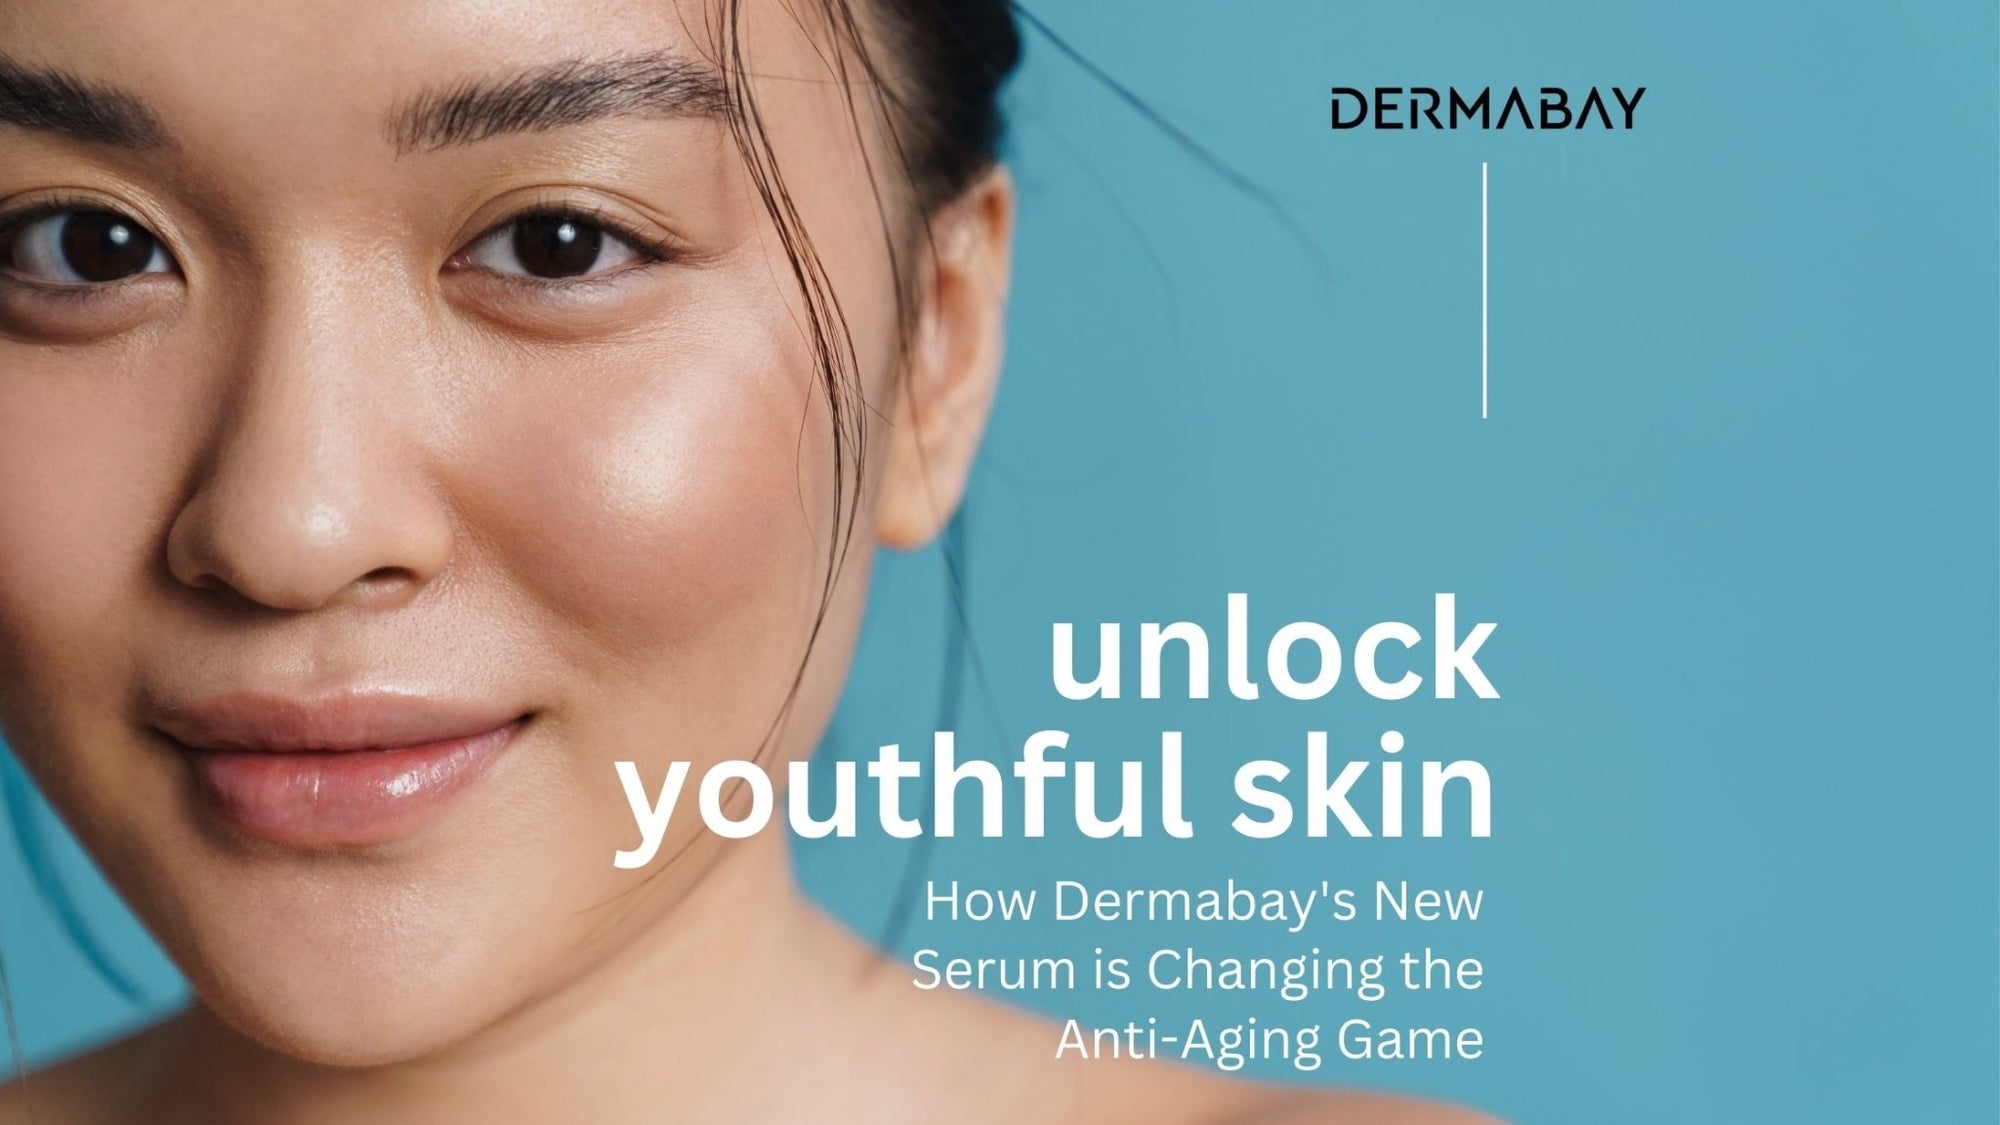 Unlock Youthful Skin: How Dermabay's New Serum is Changing the Anti-Aging Game - Dermabay